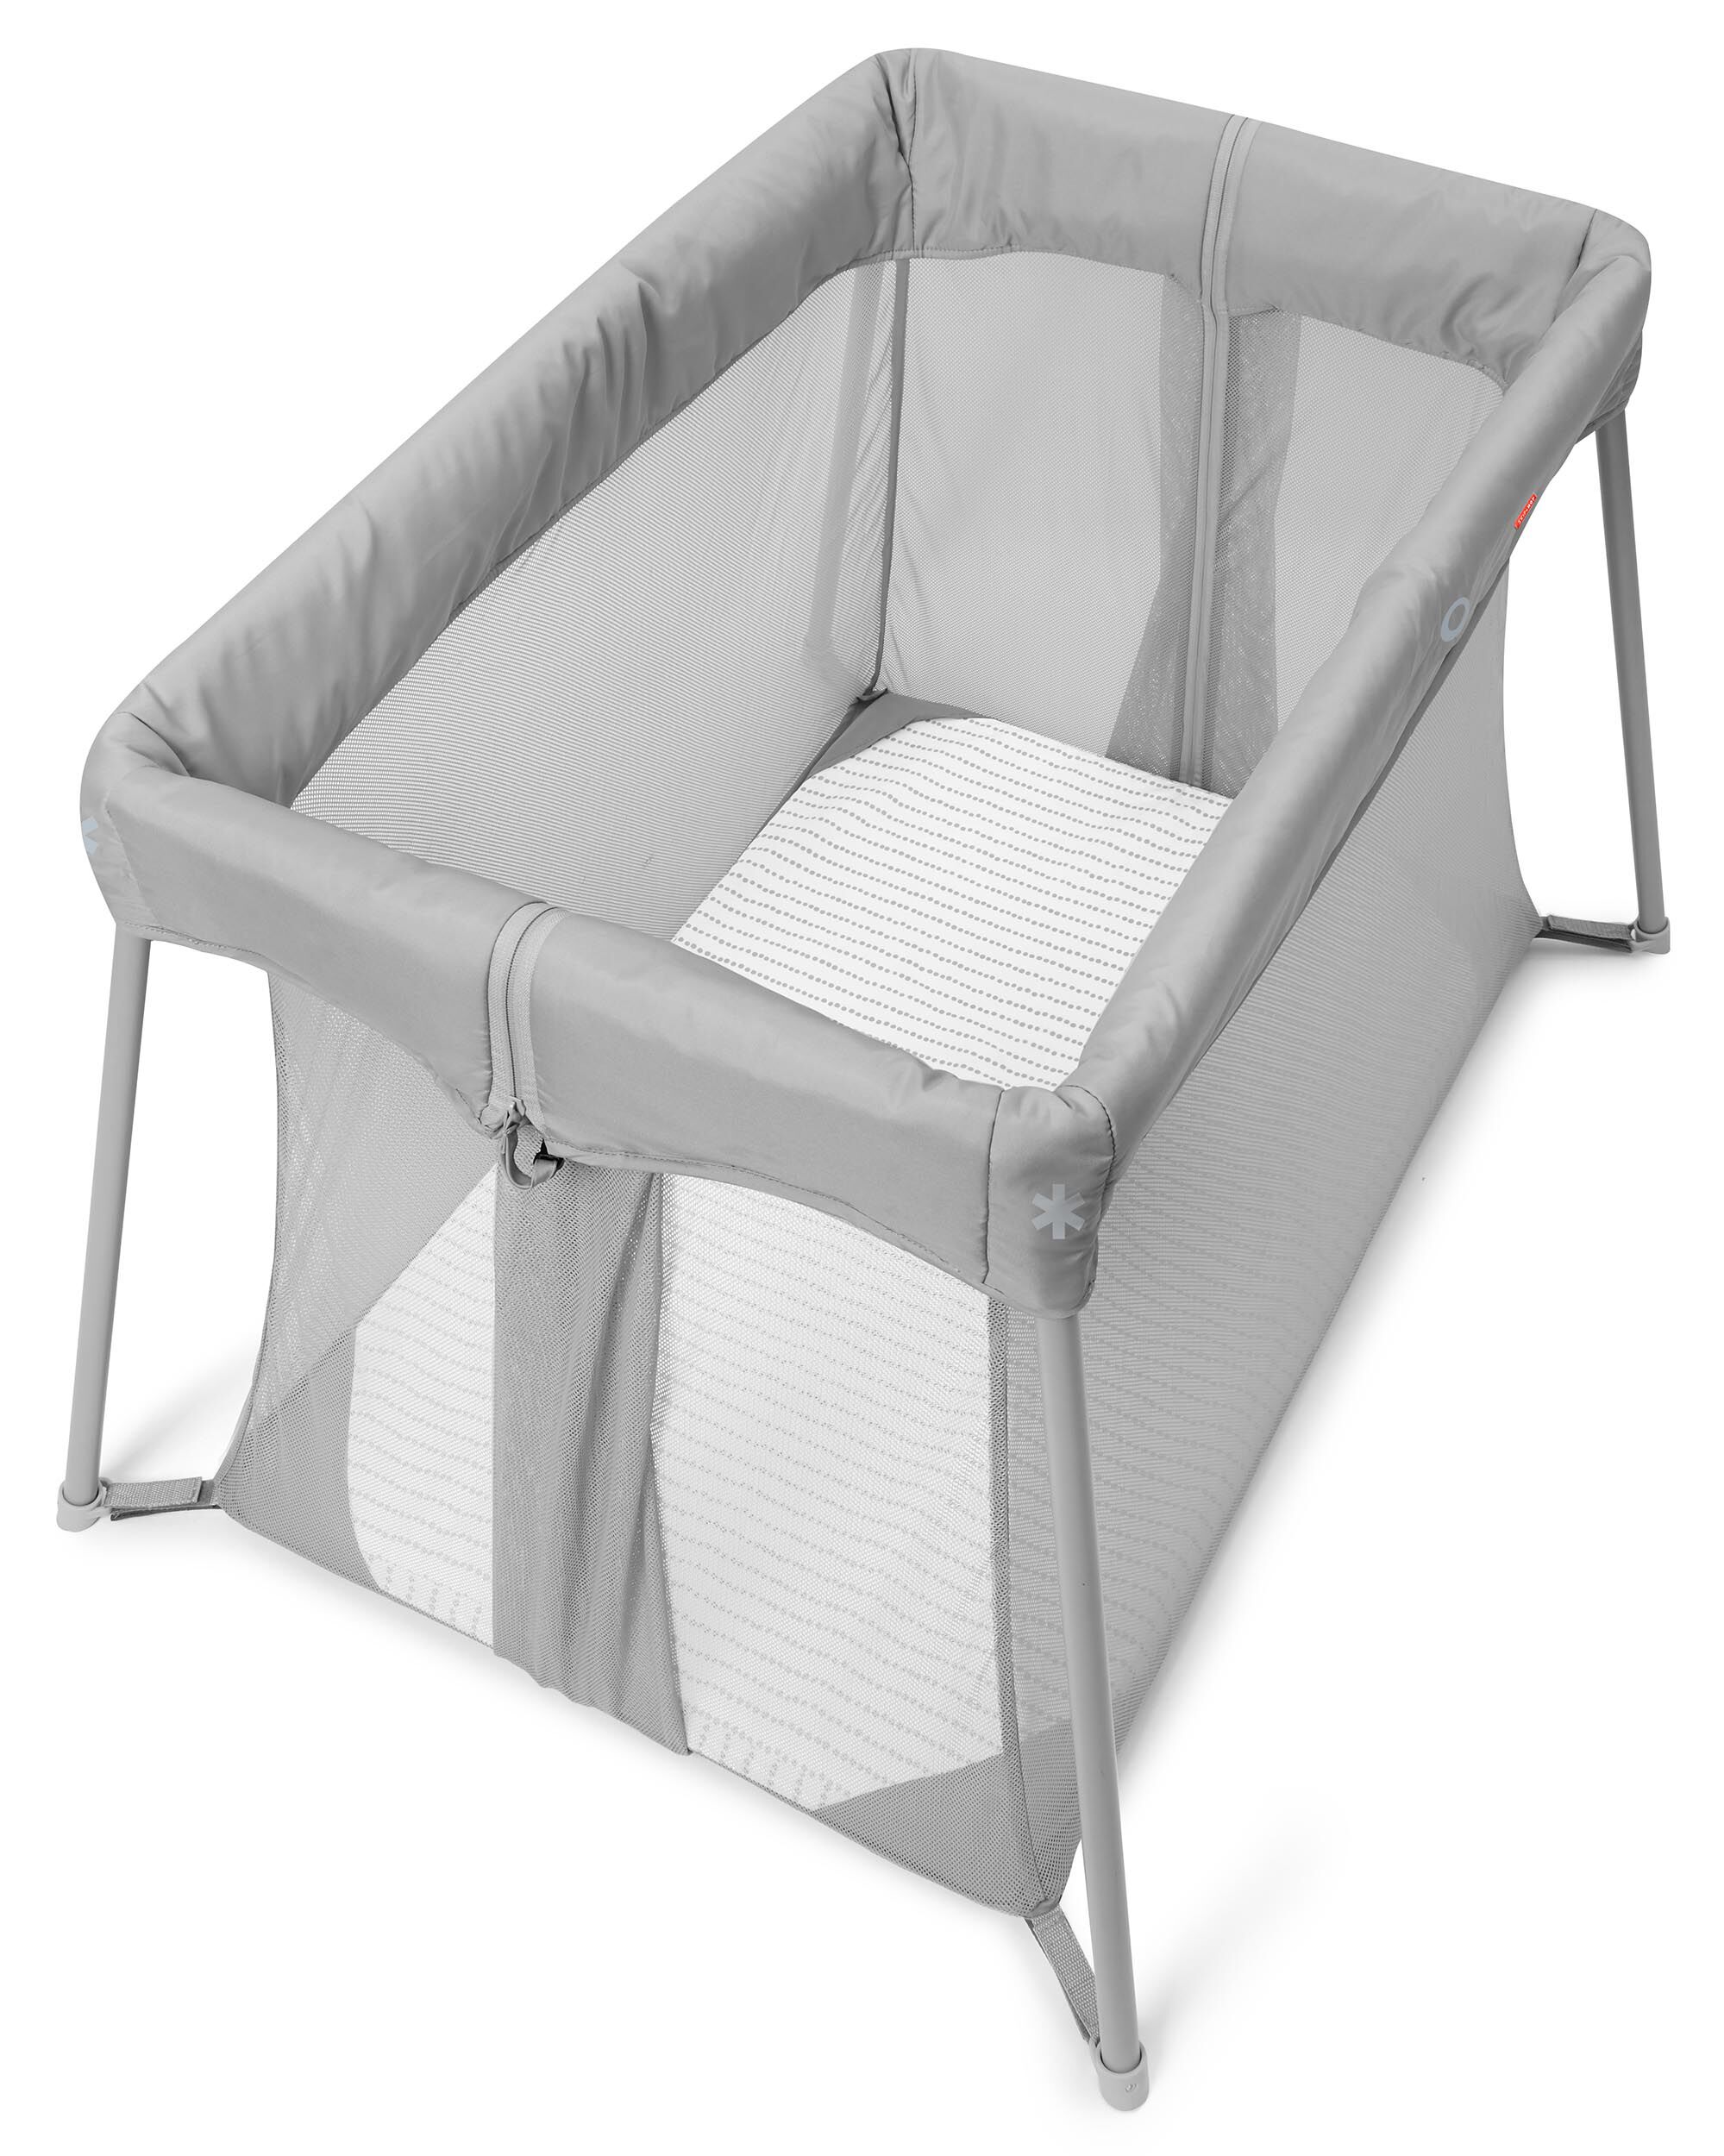 tall travel cot